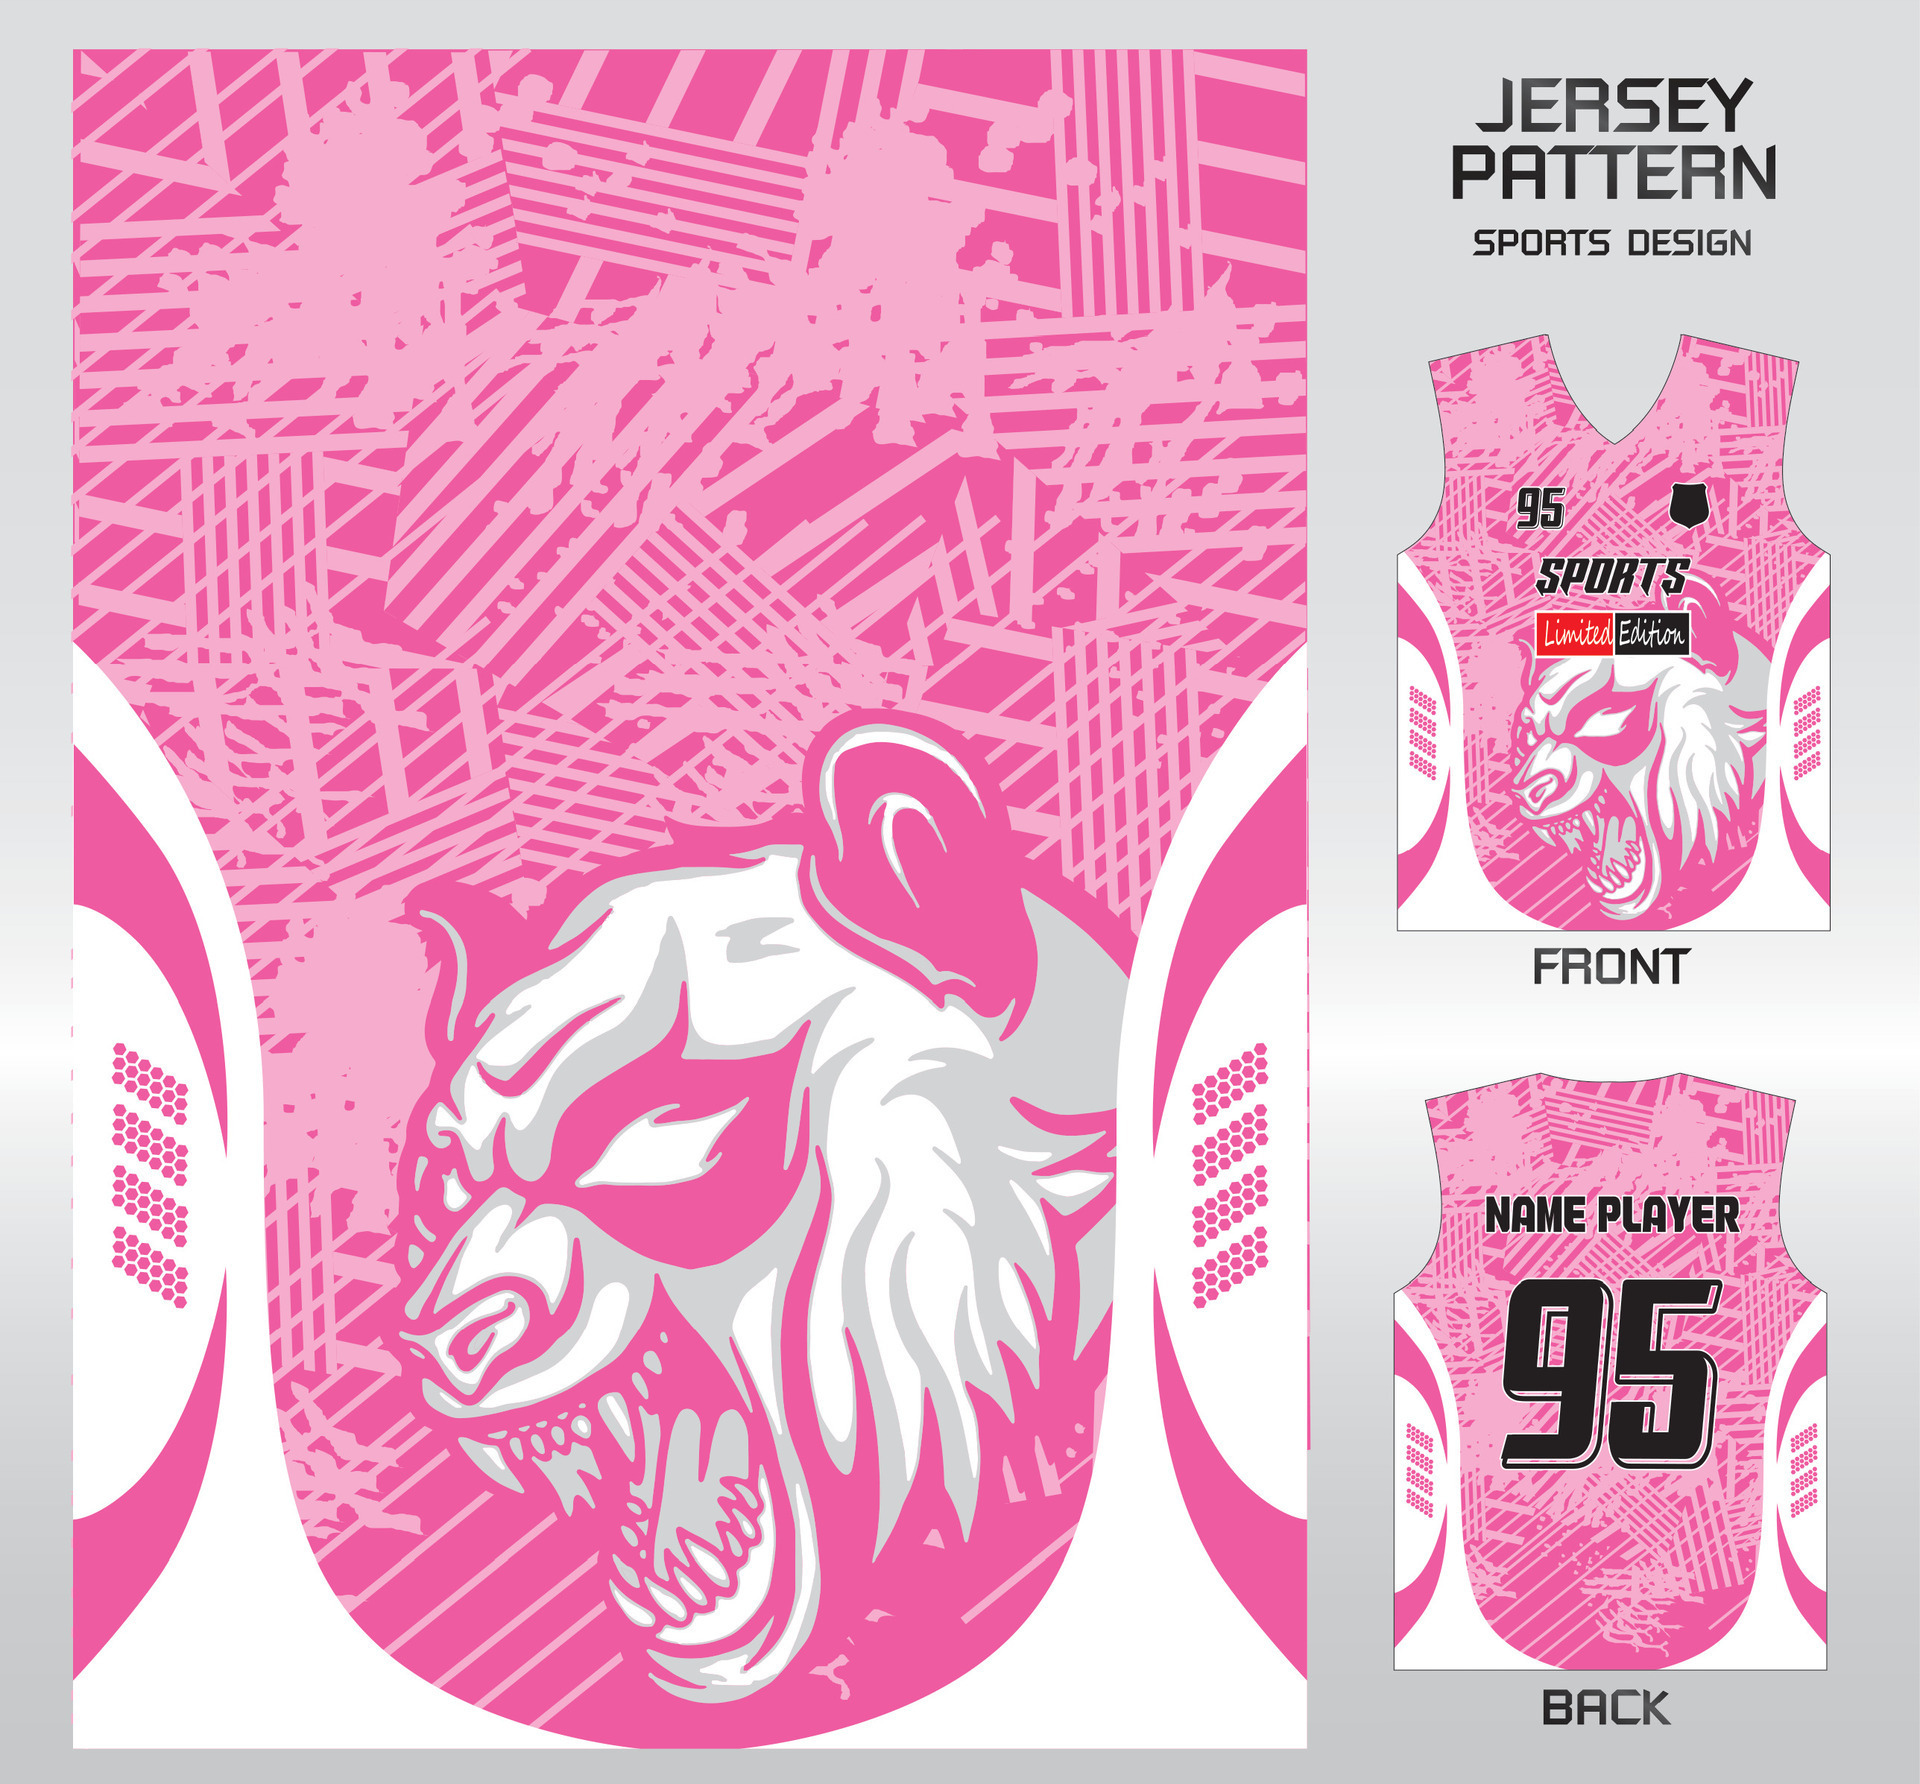 Pattern vector sports shirt background image.pink and white Angry